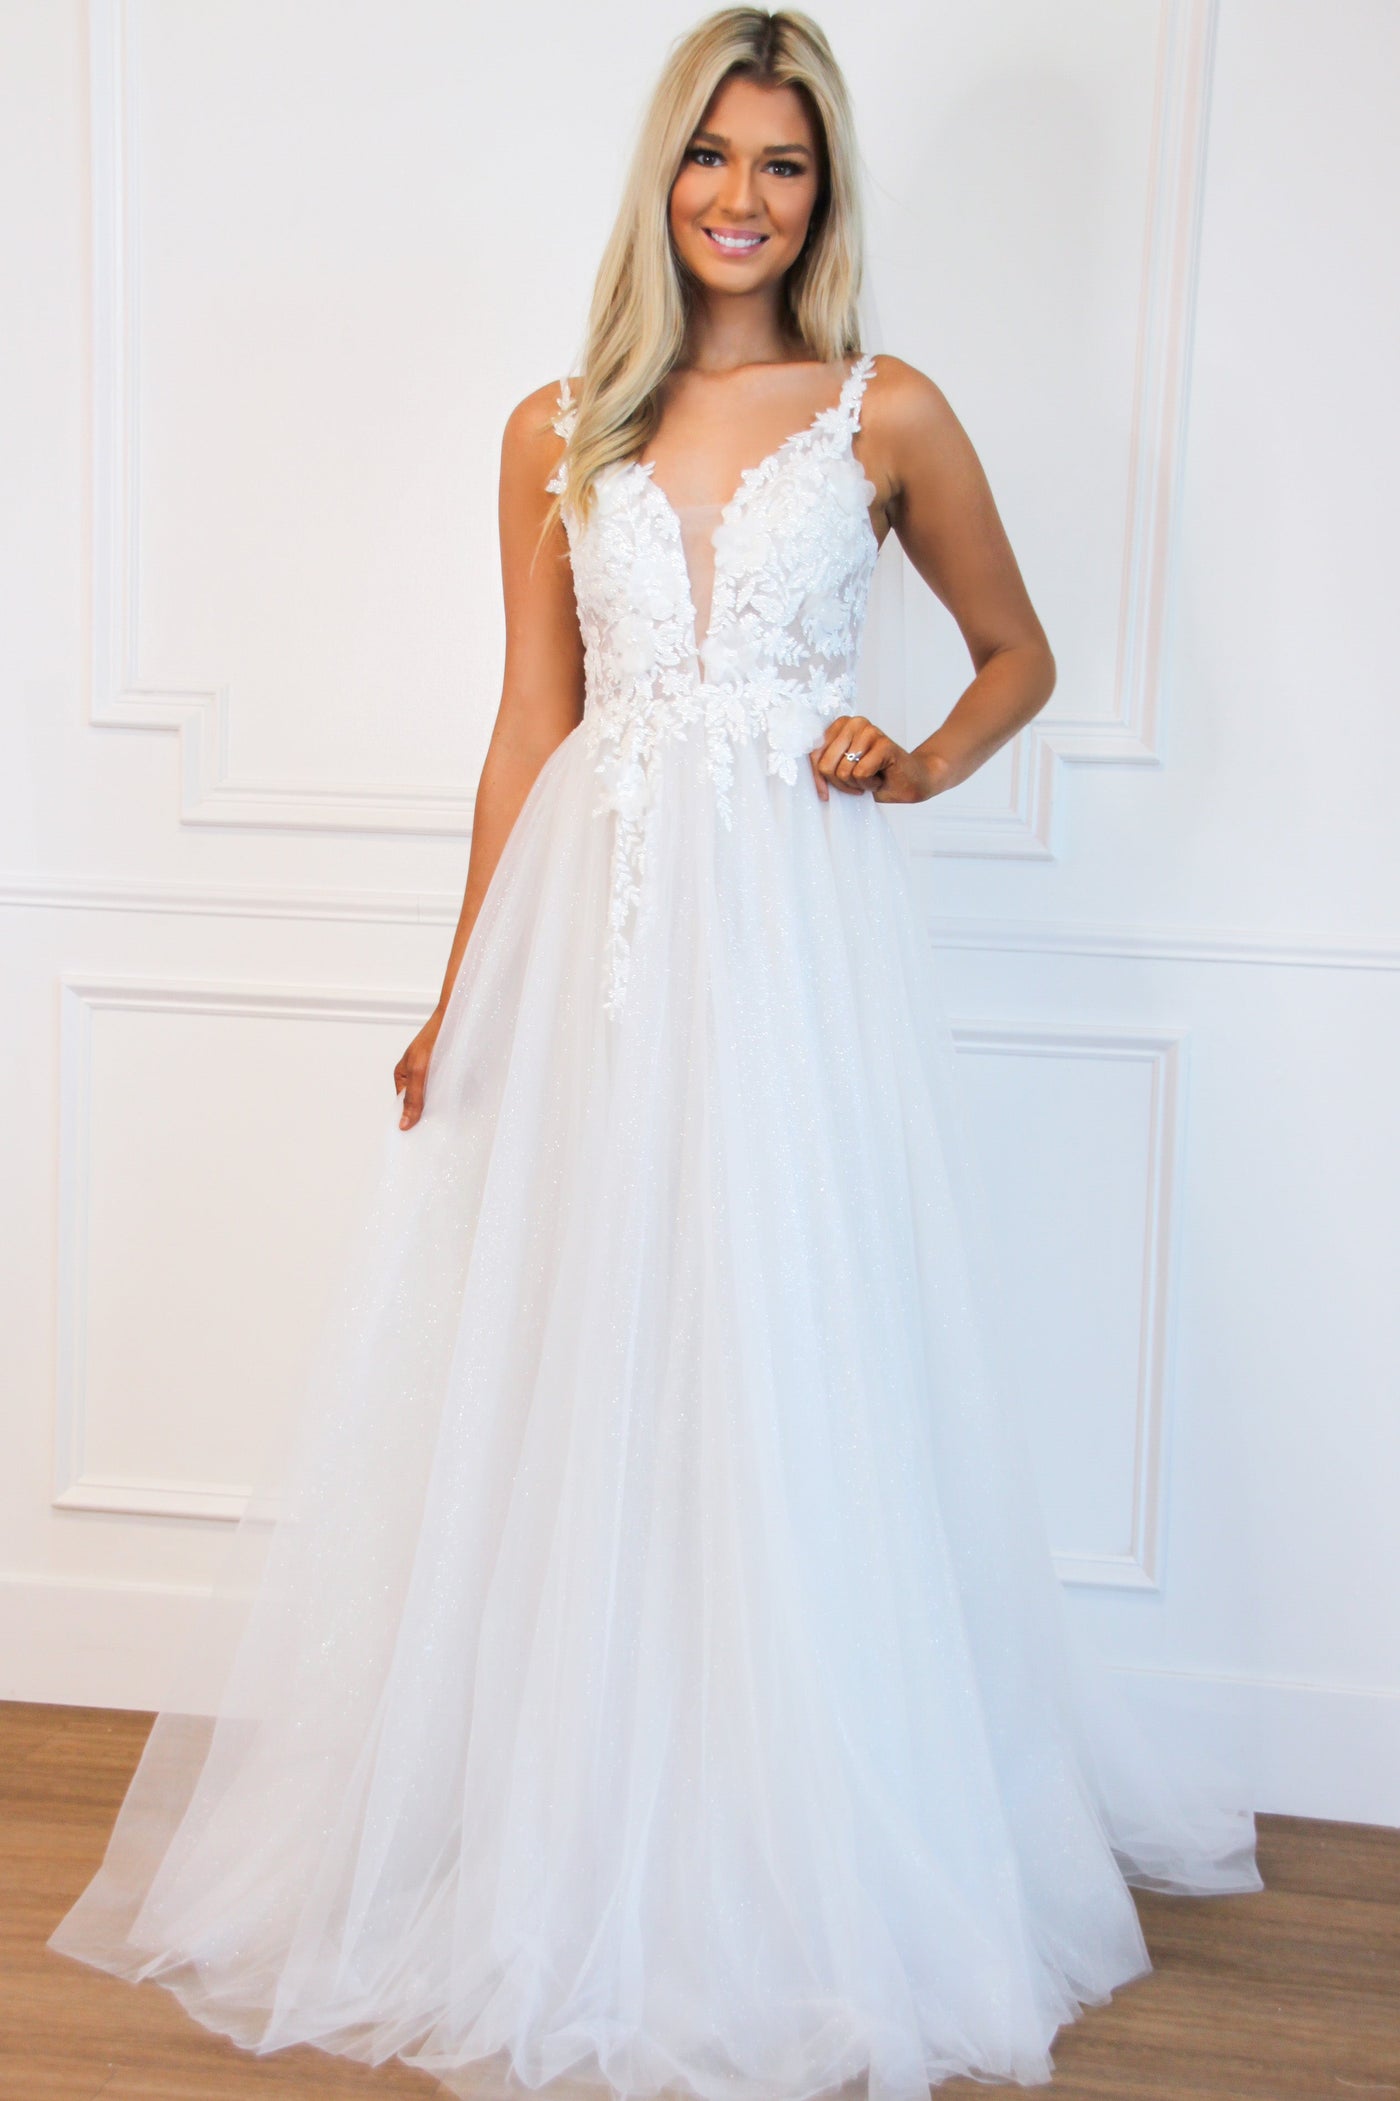 Until I Found You Sparkly Tulle Wedding Dress: Off White - Bella and Bloom Boutique